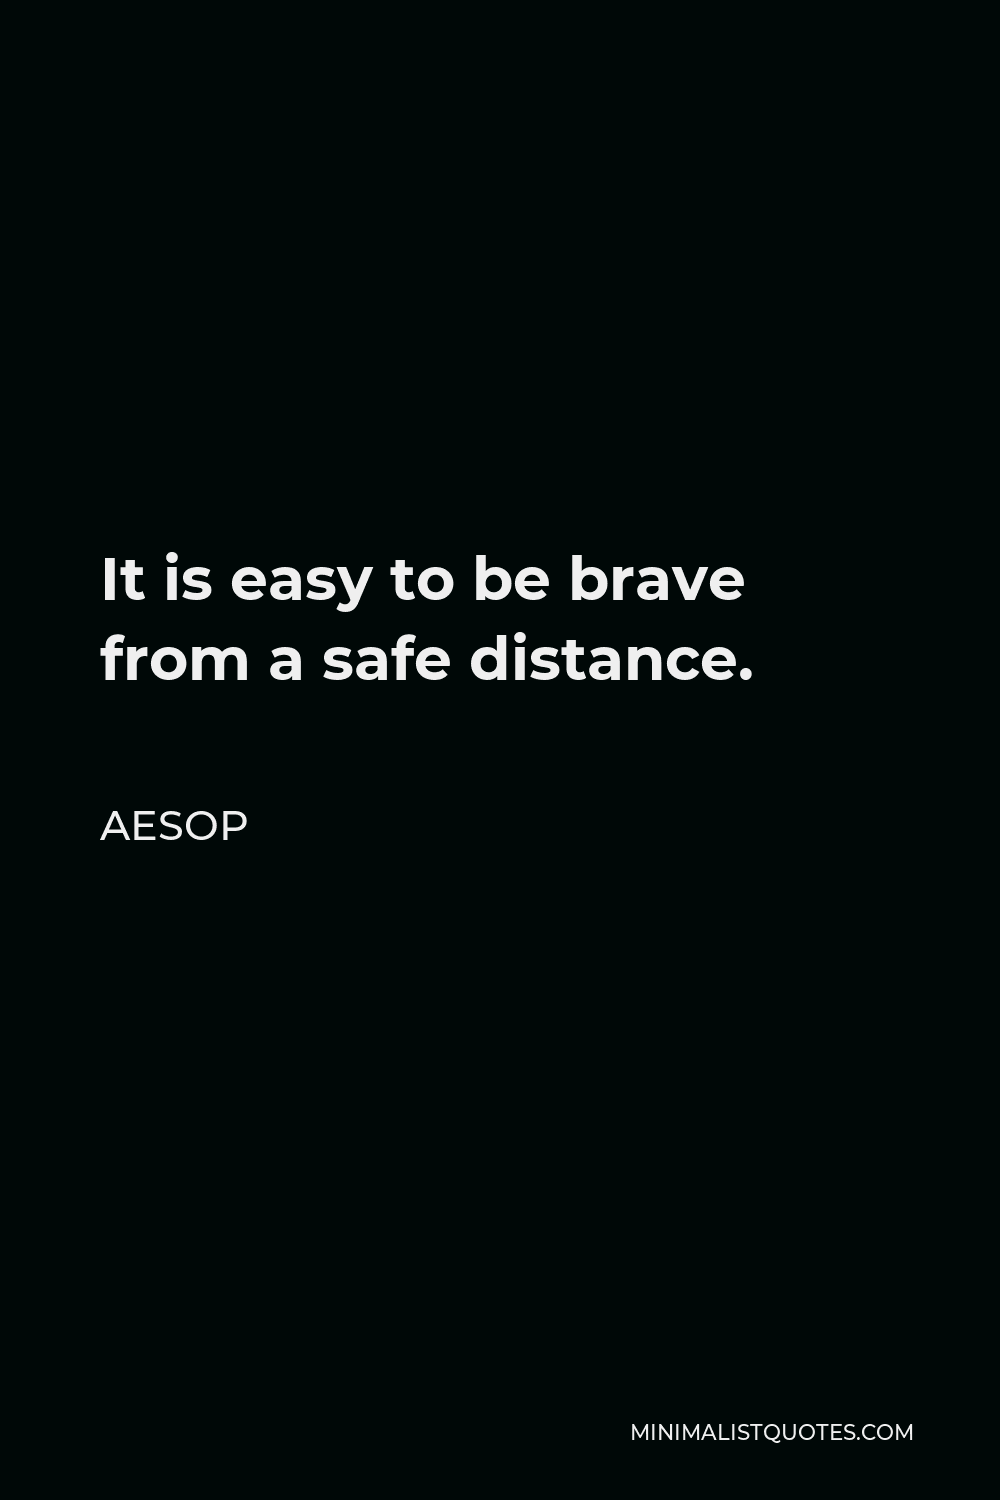 Aesop Quote - It is easy to be brave from a safe distance.